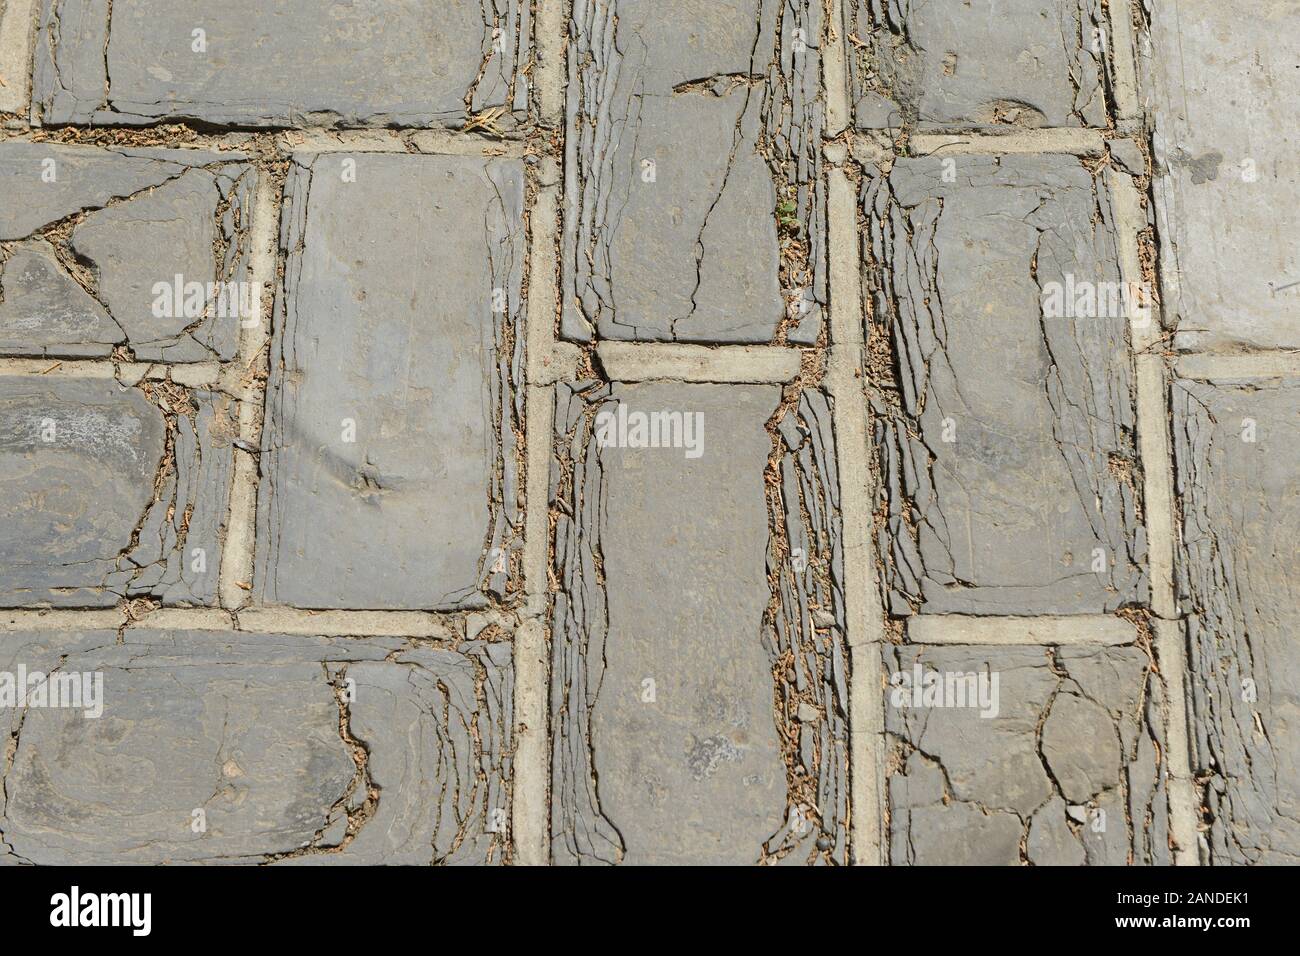 Paving bricks damaged by very heavy use at the Temple of Heaven in Beijing, China Stock Photo